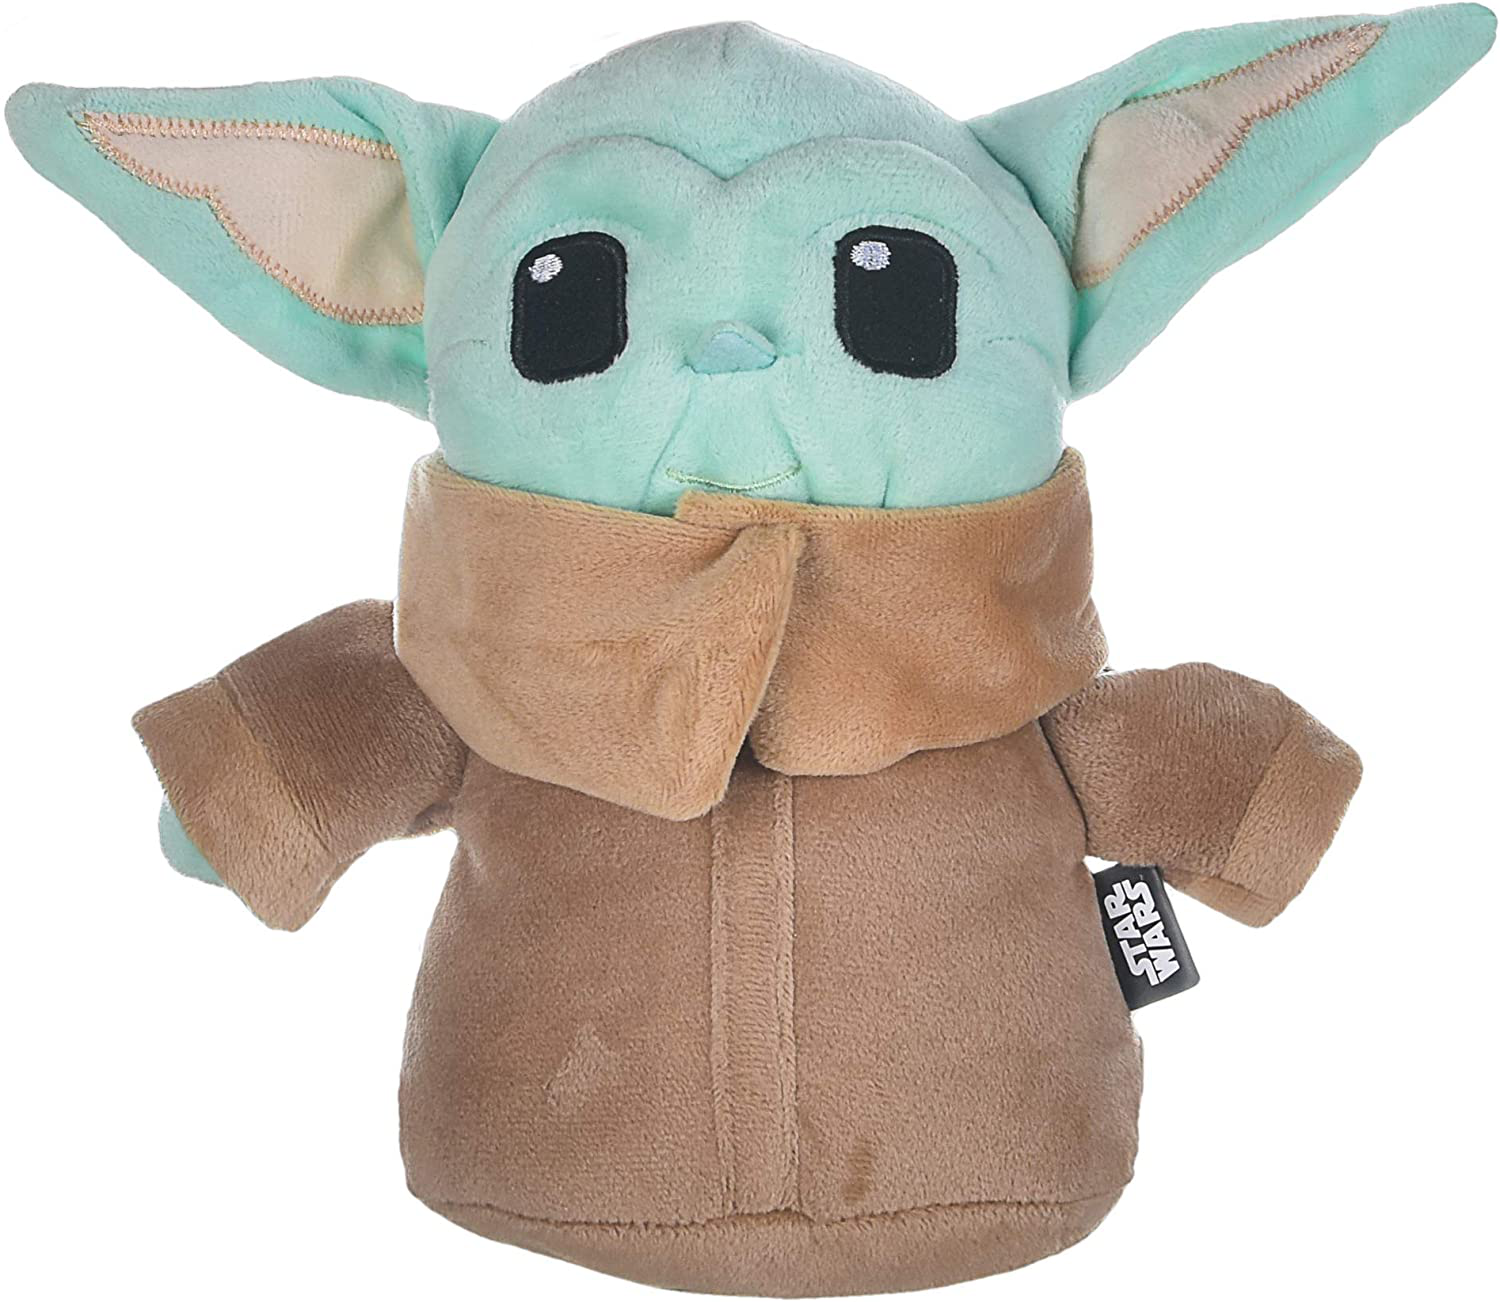 STAR WARS Mandalorian the Child Plush Figure Dog Toy - 6 Inch, 9 Inch, or 12 Inch Dog Toy from the Mandalorian - Soft and Plush Dog Toys Safe Fabric Squeaky Dog Toy for All Dogs - Baby Yoda Dog Toy Animals & Pet Supplies > Pet Supplies > Dog Supplies > Dog Toys Fetch for Pets 1 9 Inch 